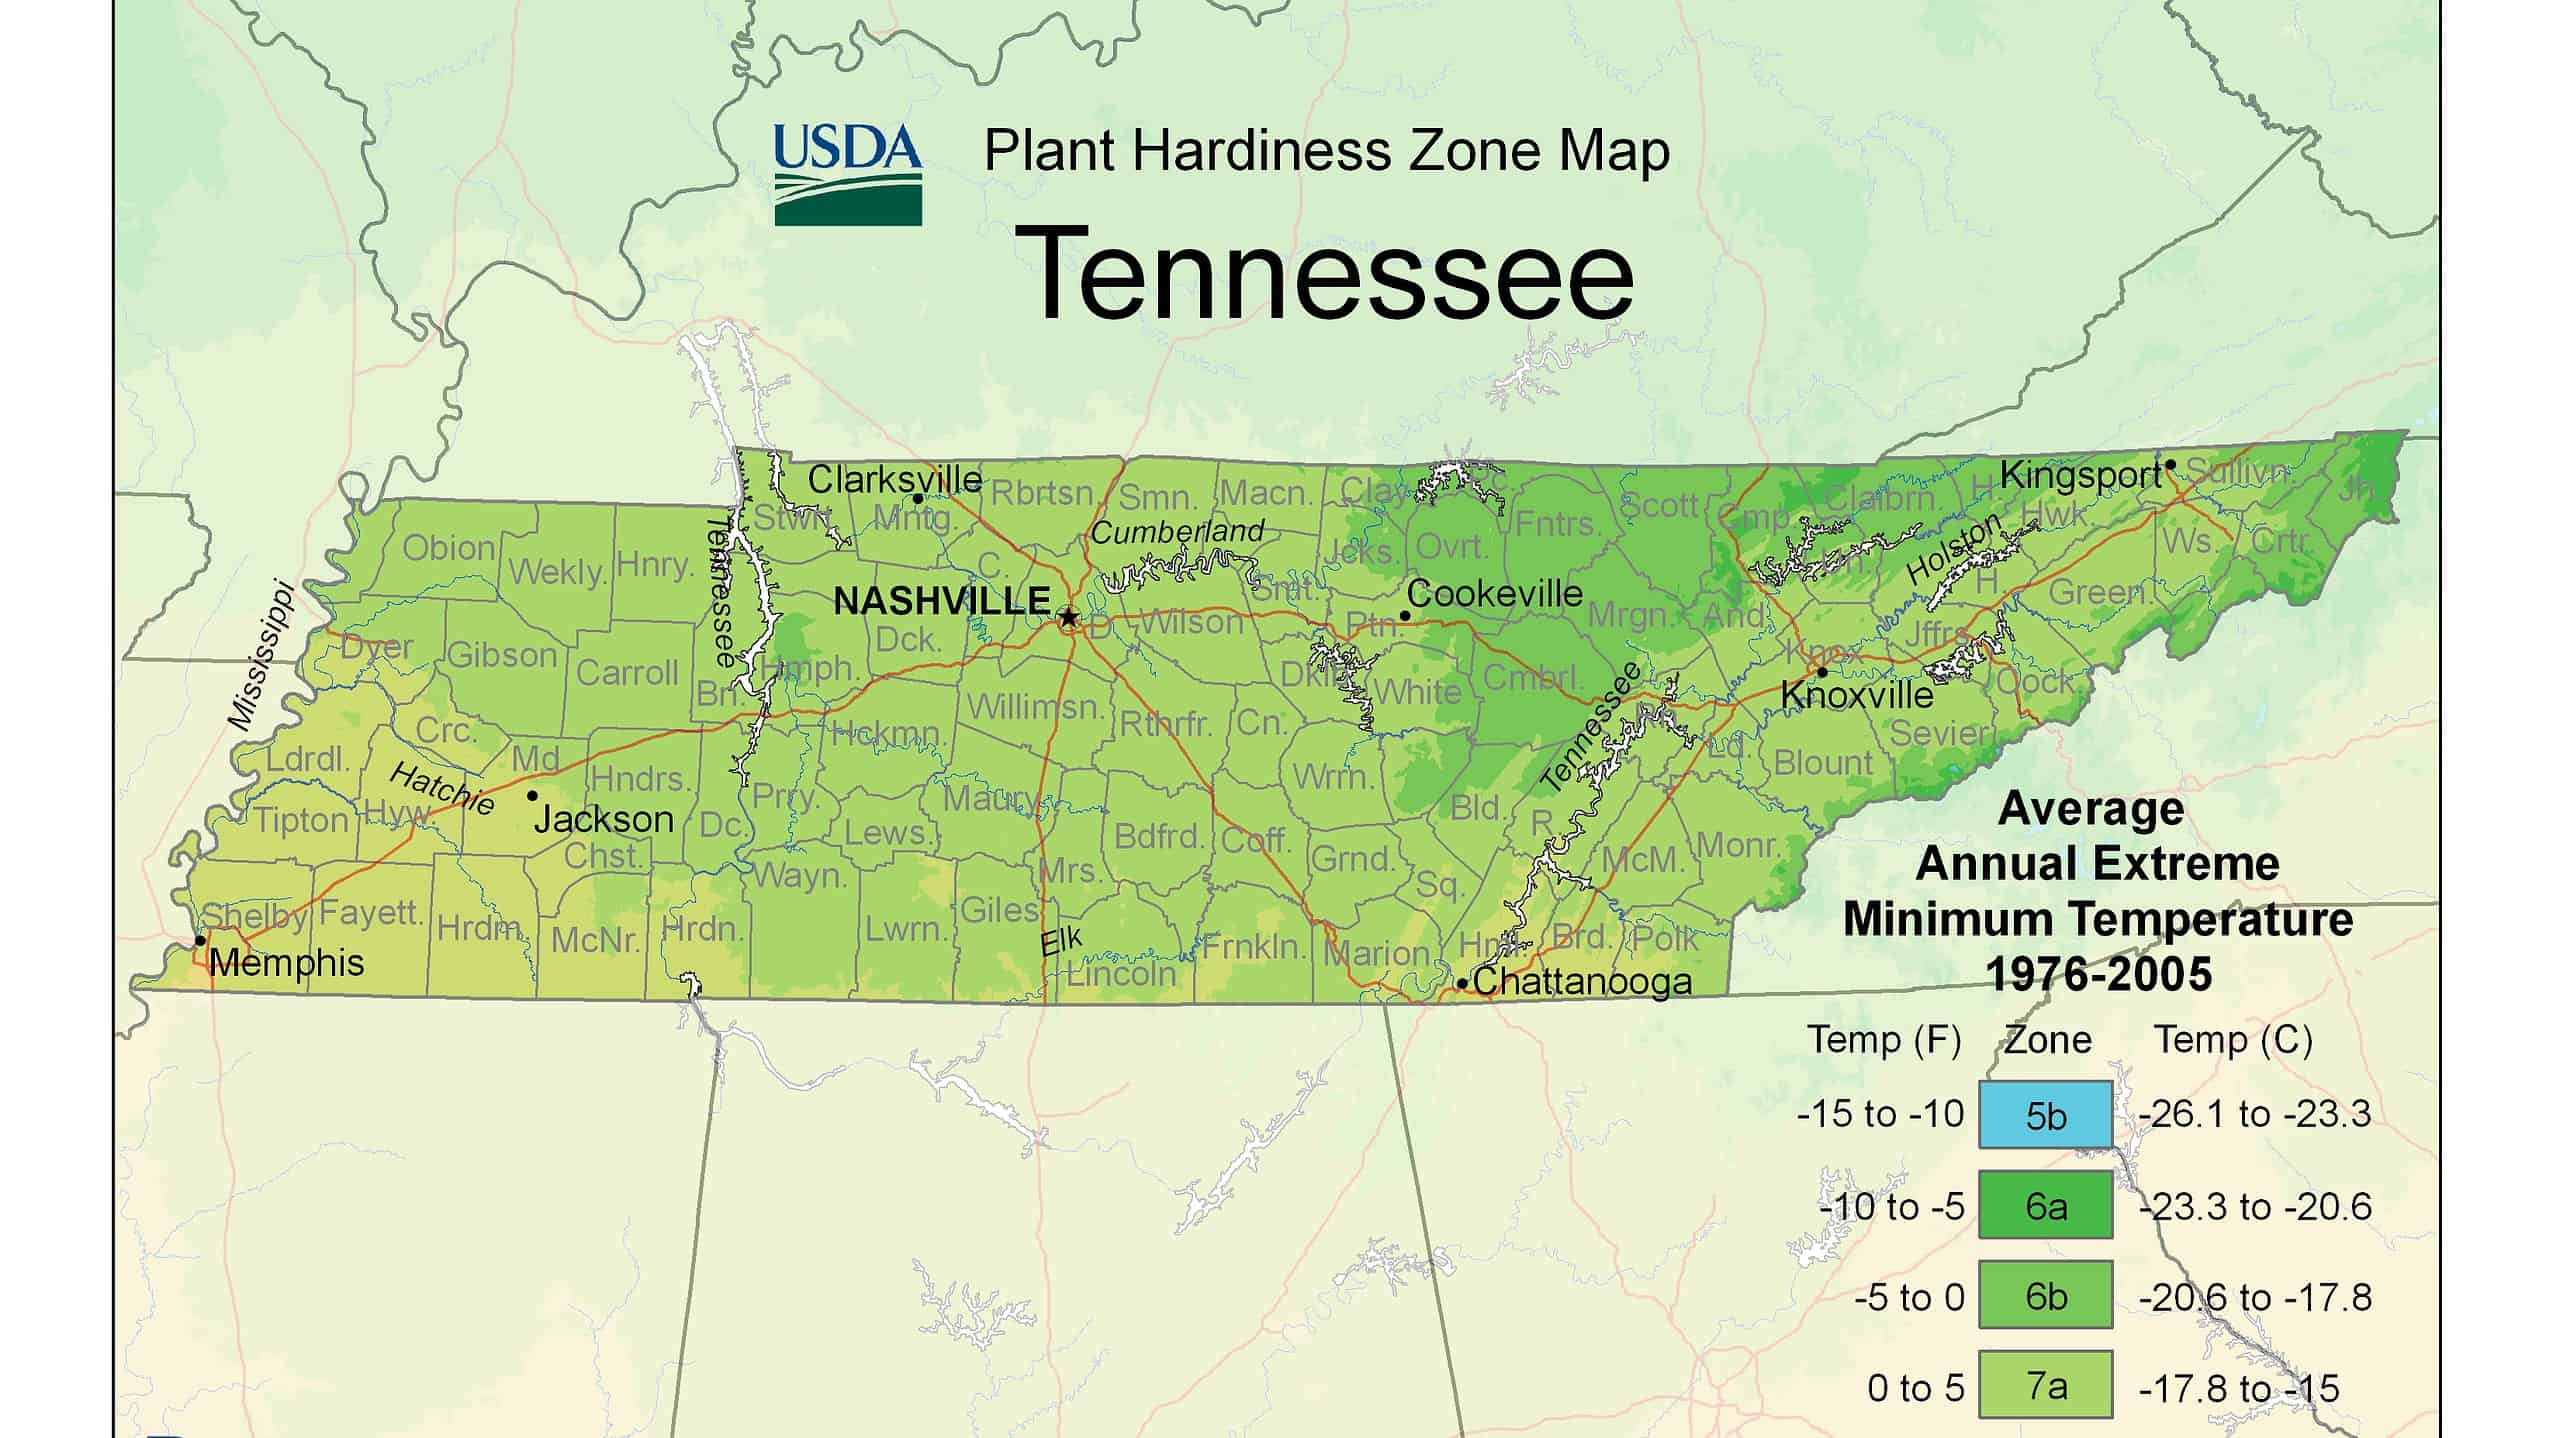 USDA Plant Hardiness Zone Map of Tennessee.